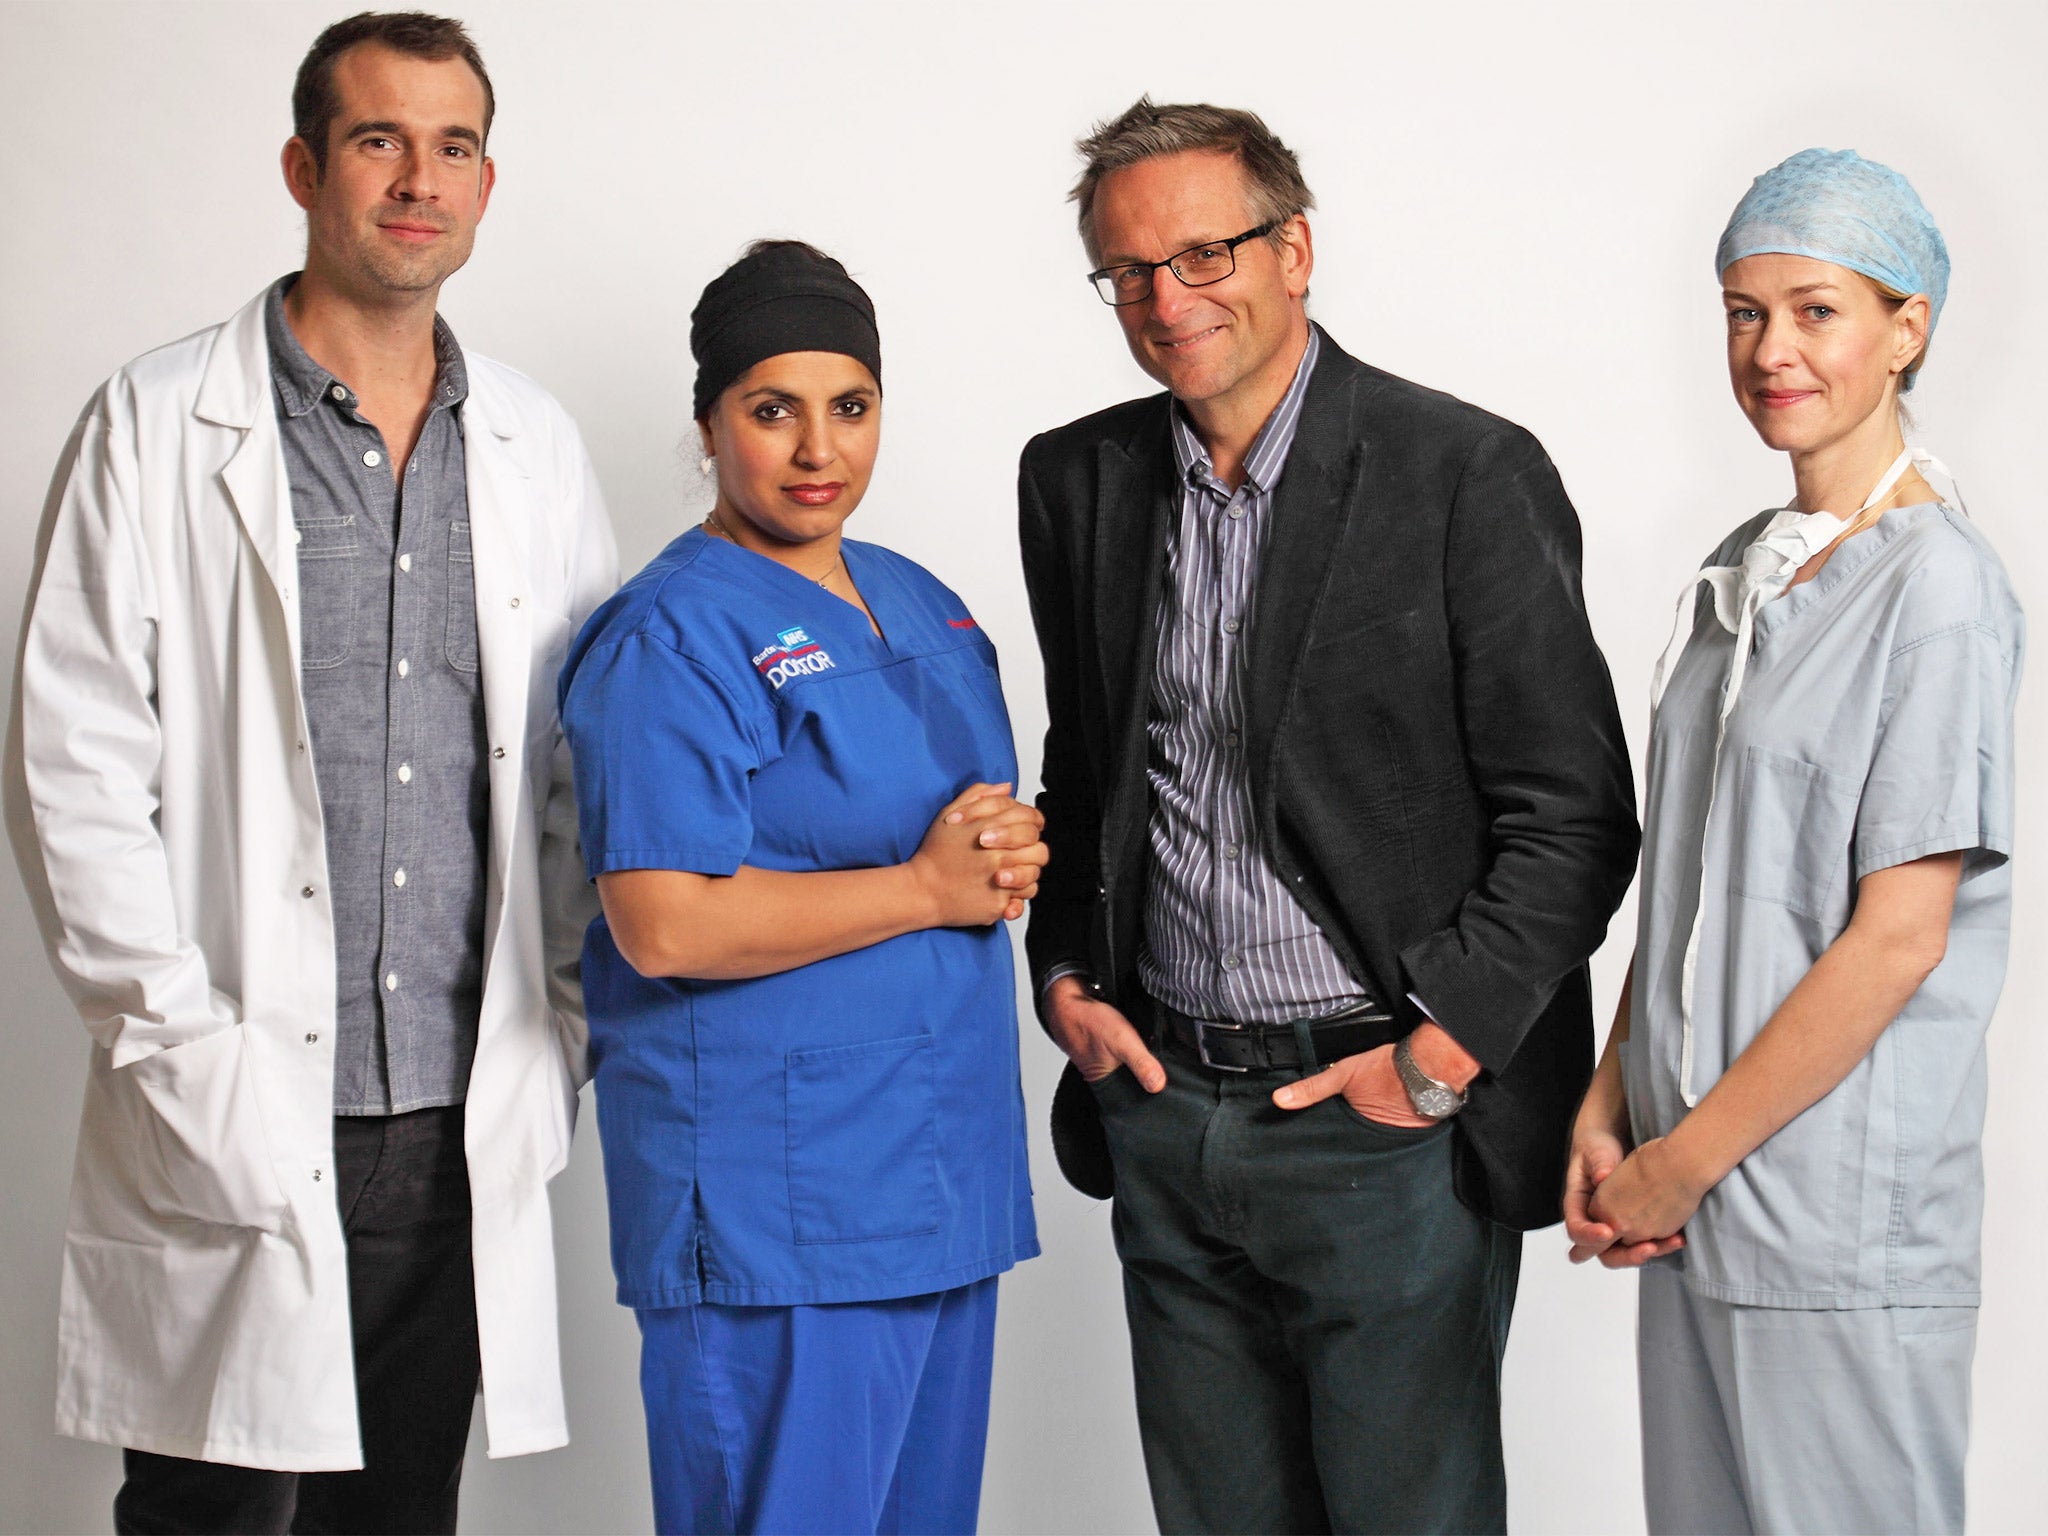 They’ll see you now: Dr Chris van Tulleken, Dr Saleyha Ashan, Dr Michael Mosley and Gabriel Weston in ‘Trust Me, I’m a Doctor’